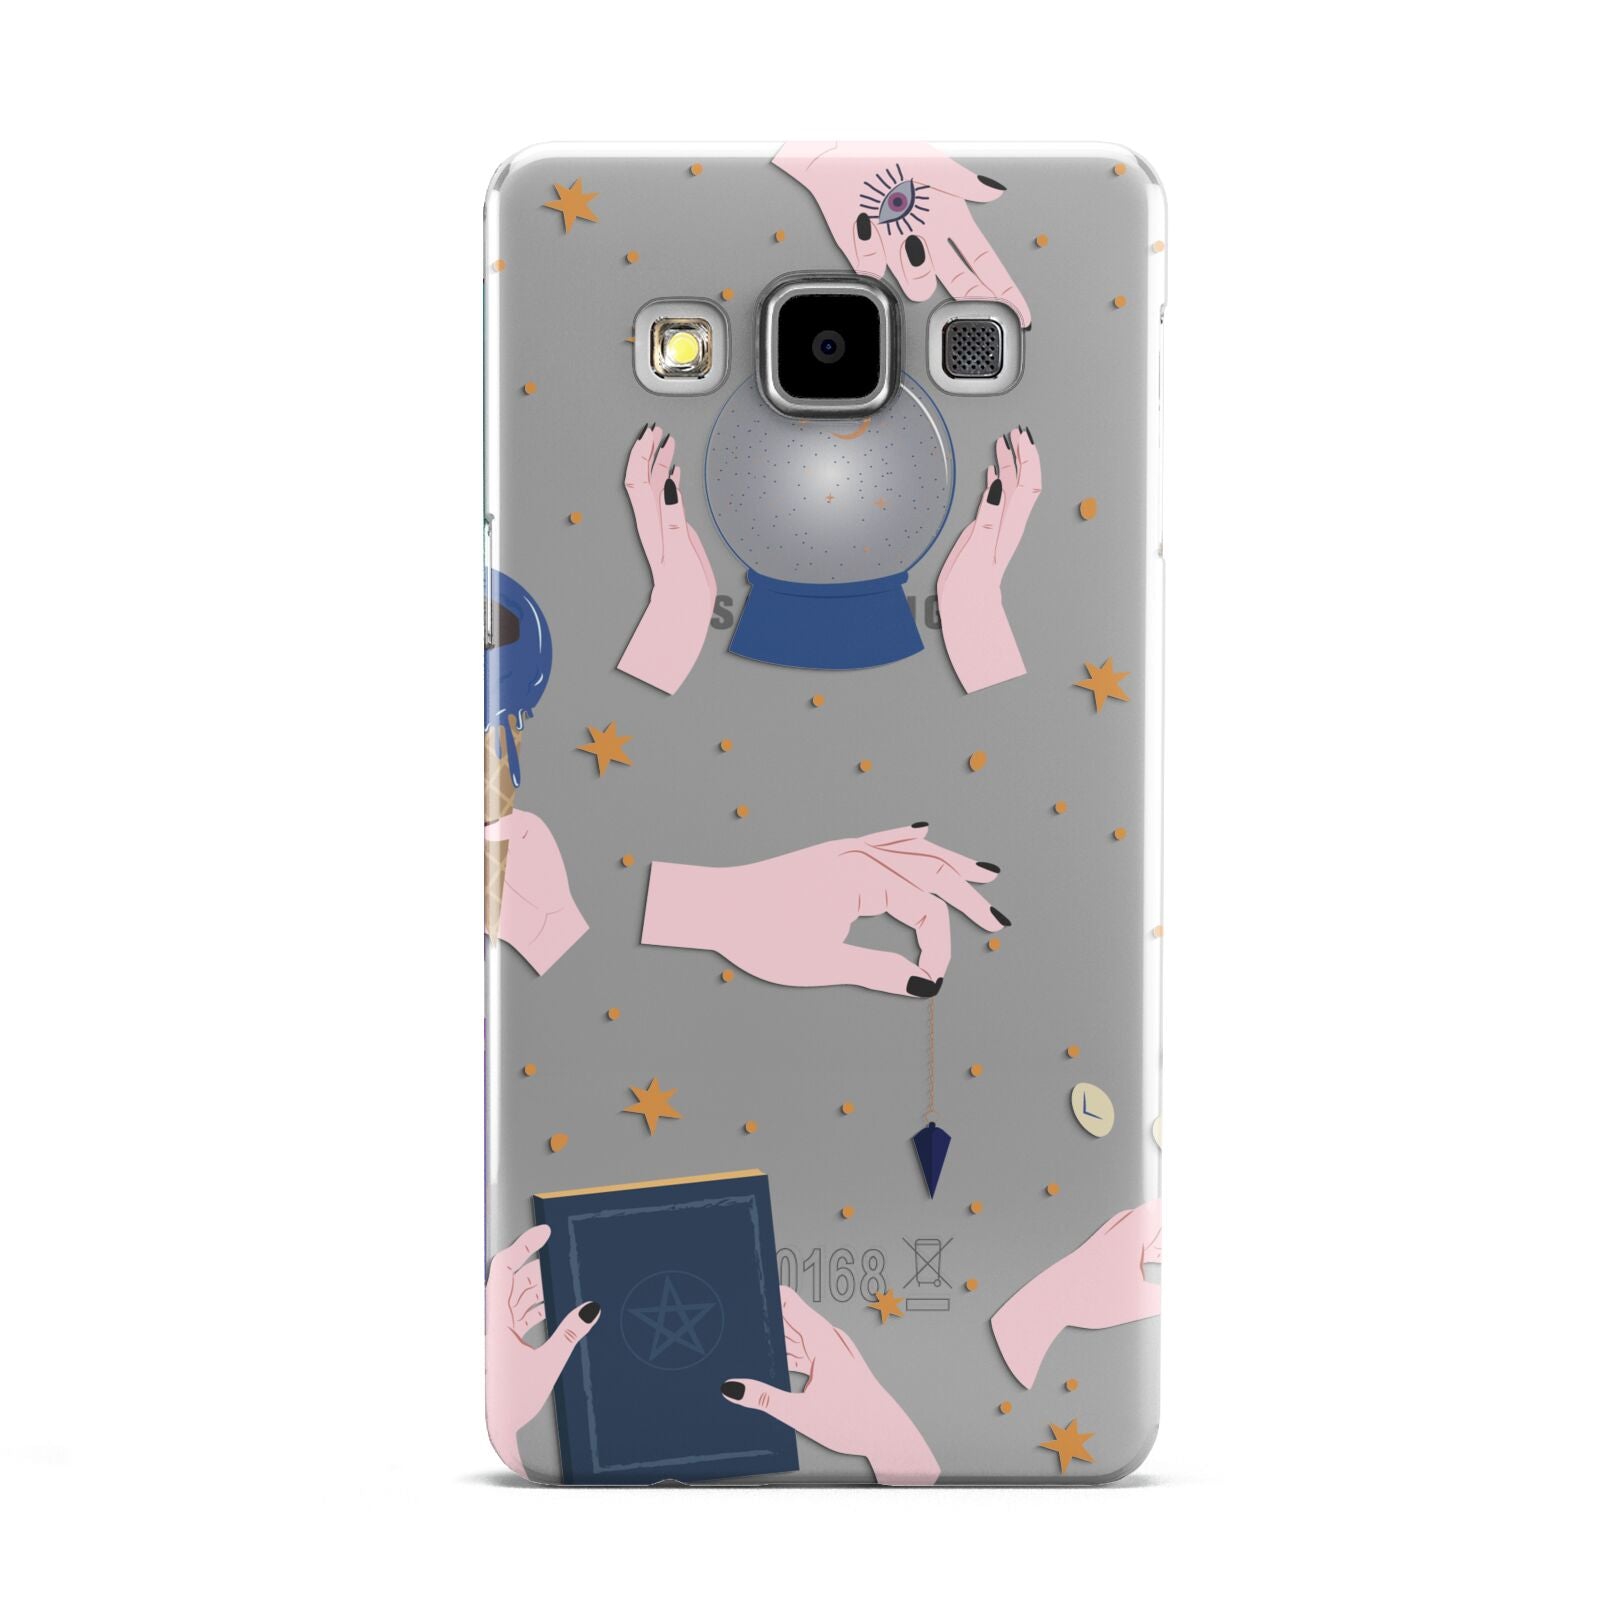 Clairvoyant Witches Hands Samsung Galaxy A5 Case